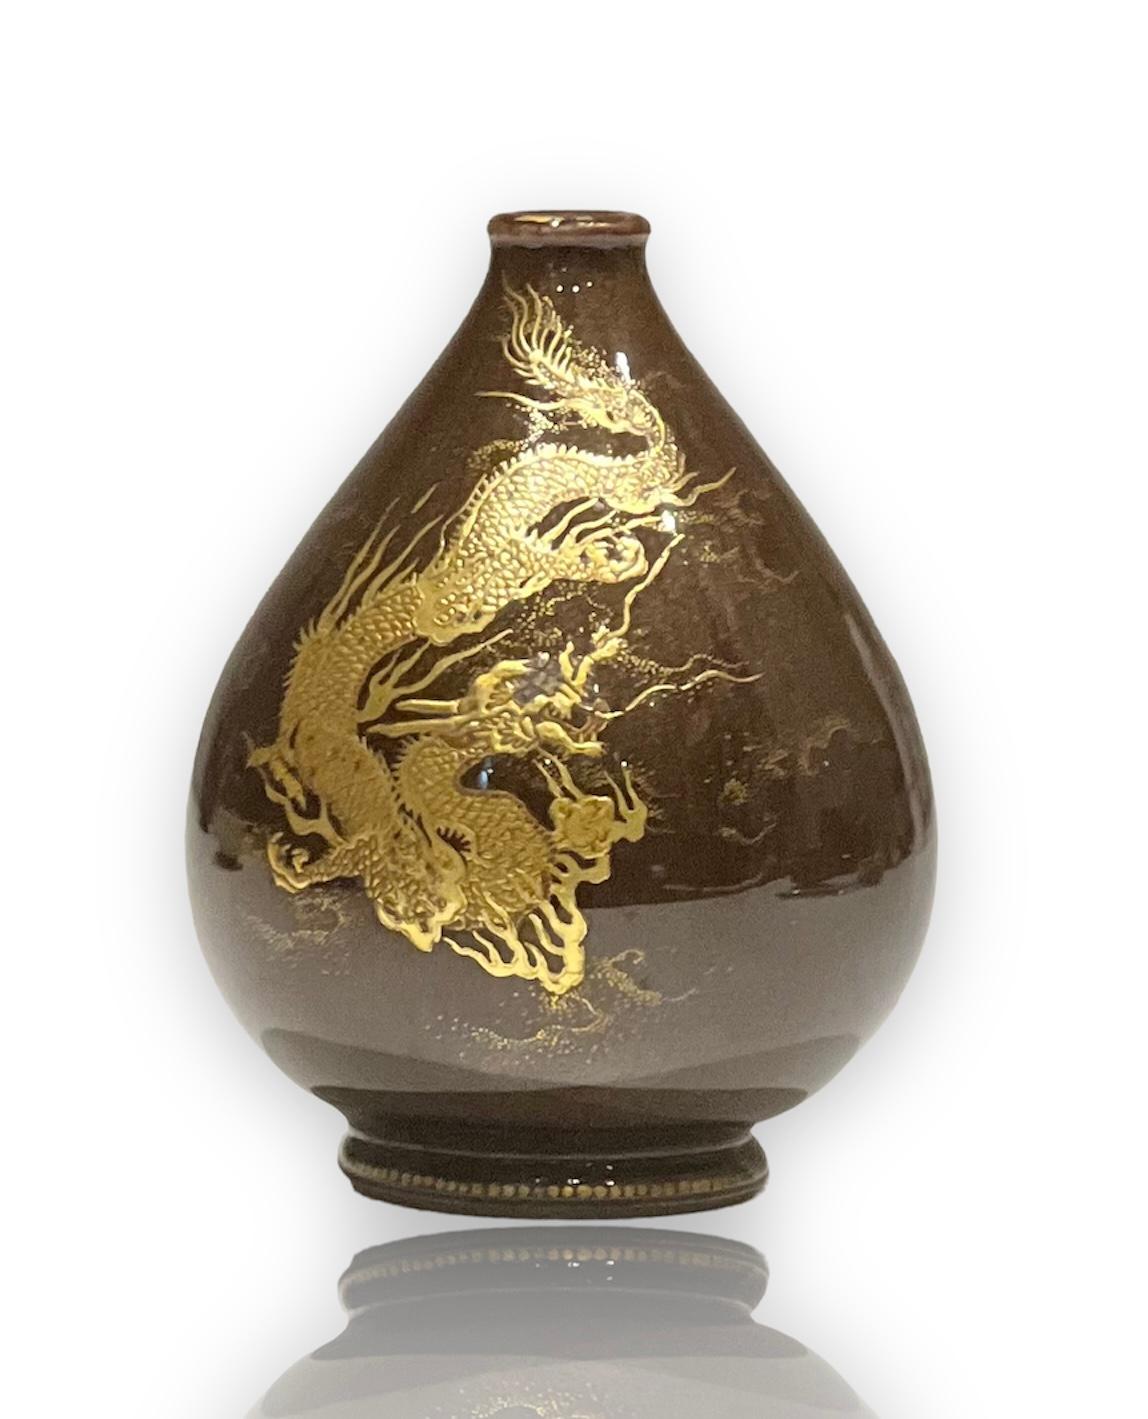 A museum quality satsuma miniature pear single-stem vase.
By Kinkozan, Meiji era (1868-1912), late 19th century.
Decorated in predominantly in gold enamels with a writhing three-clawed dragon grasping a tama (jewel) on a brown flambé-style ground;